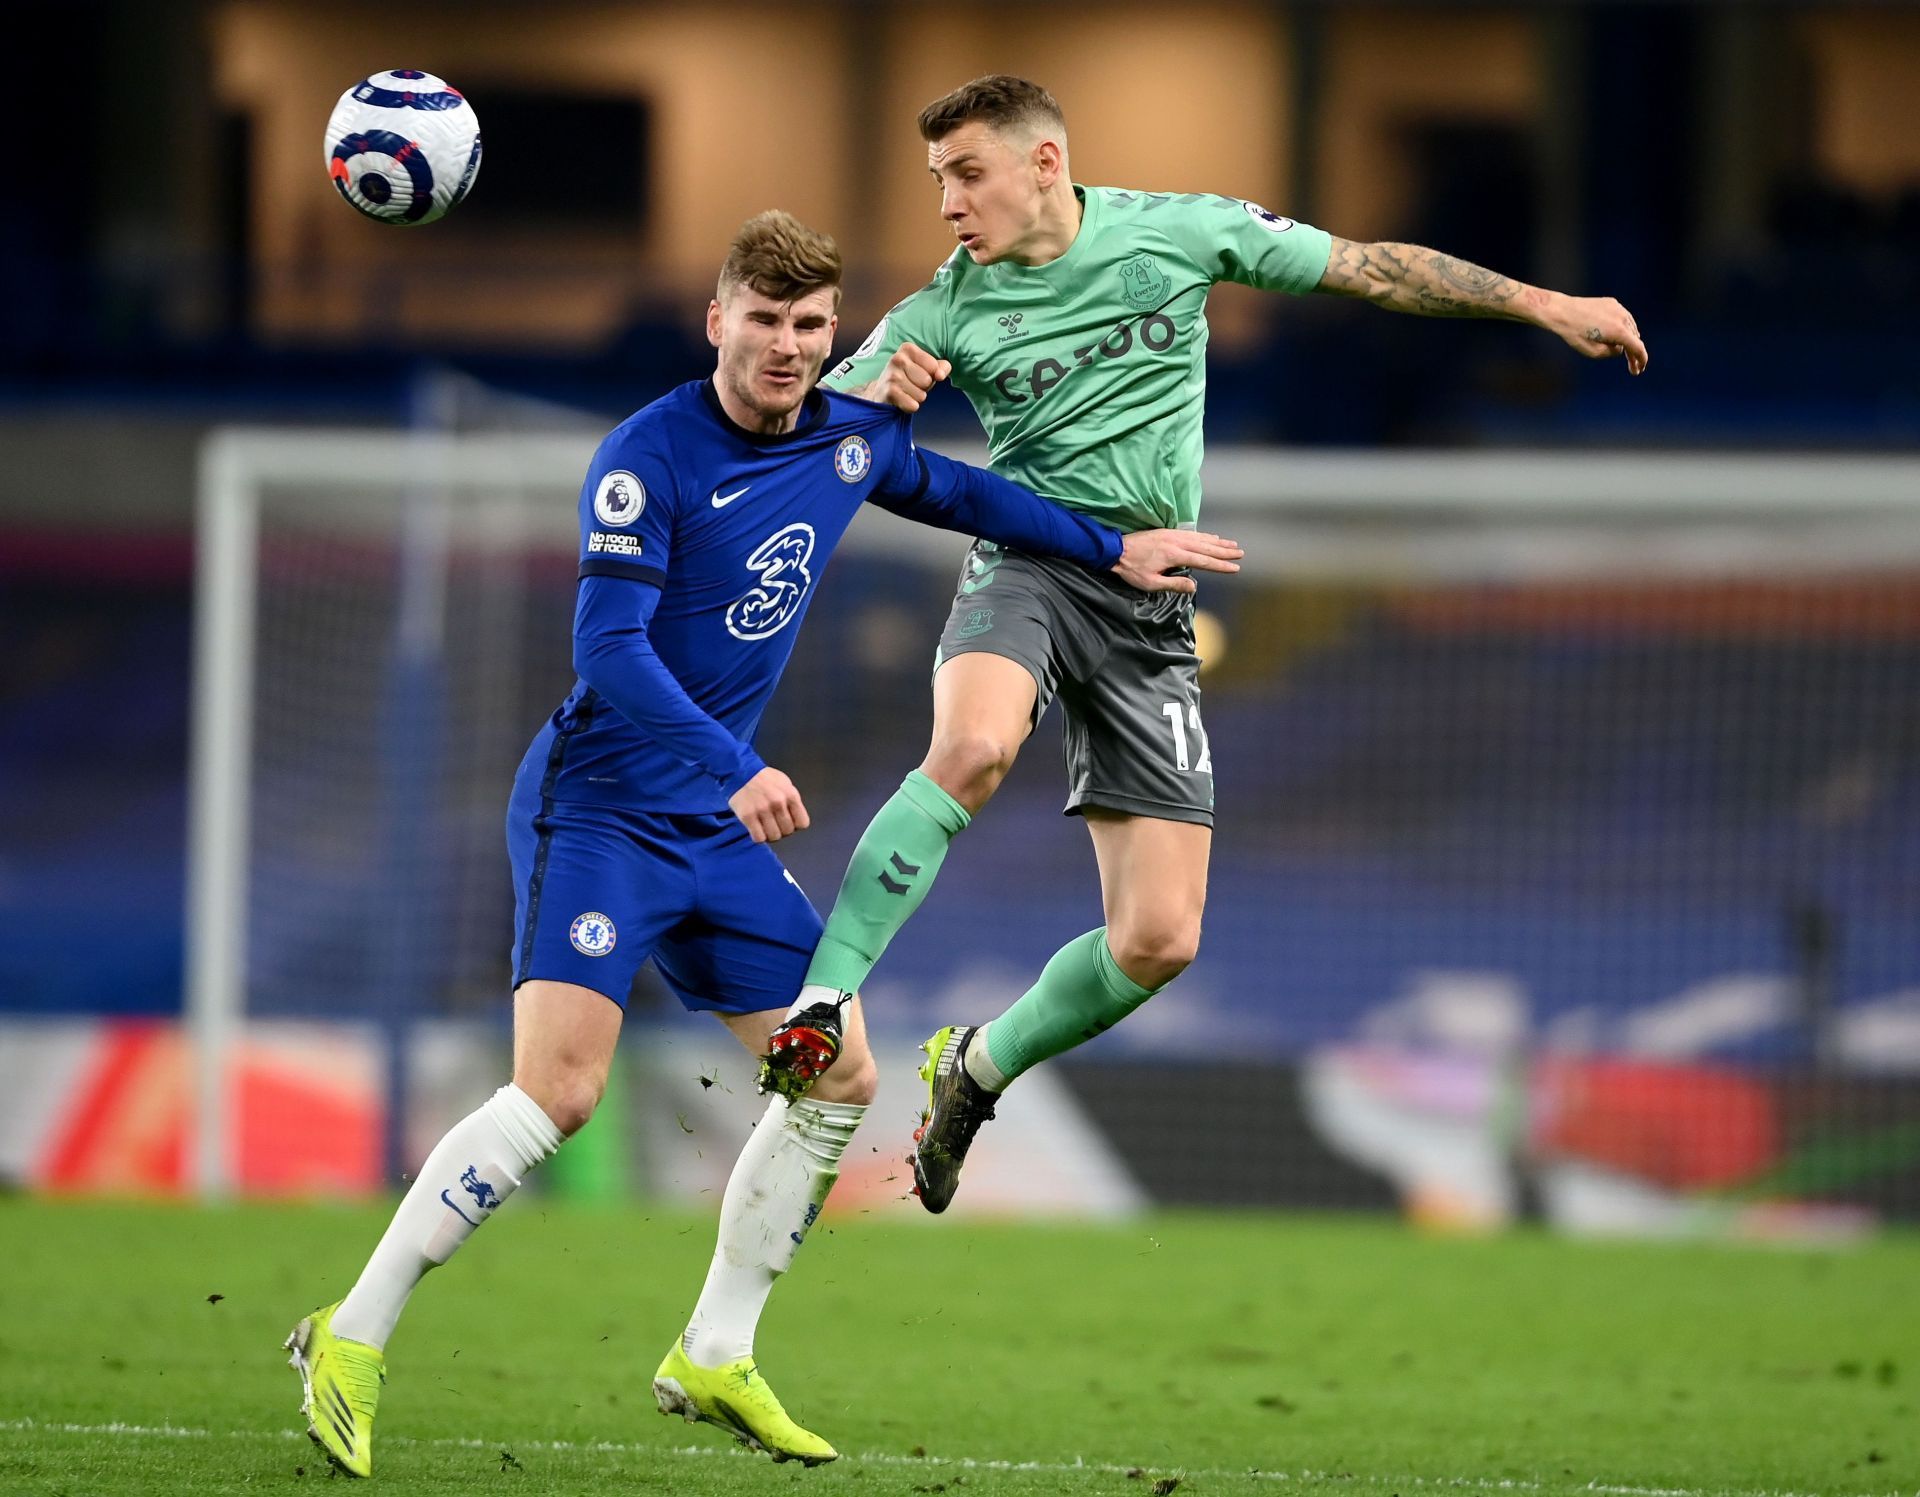 Lucas Digne (R, #12) heads away from Timo Werner (L).